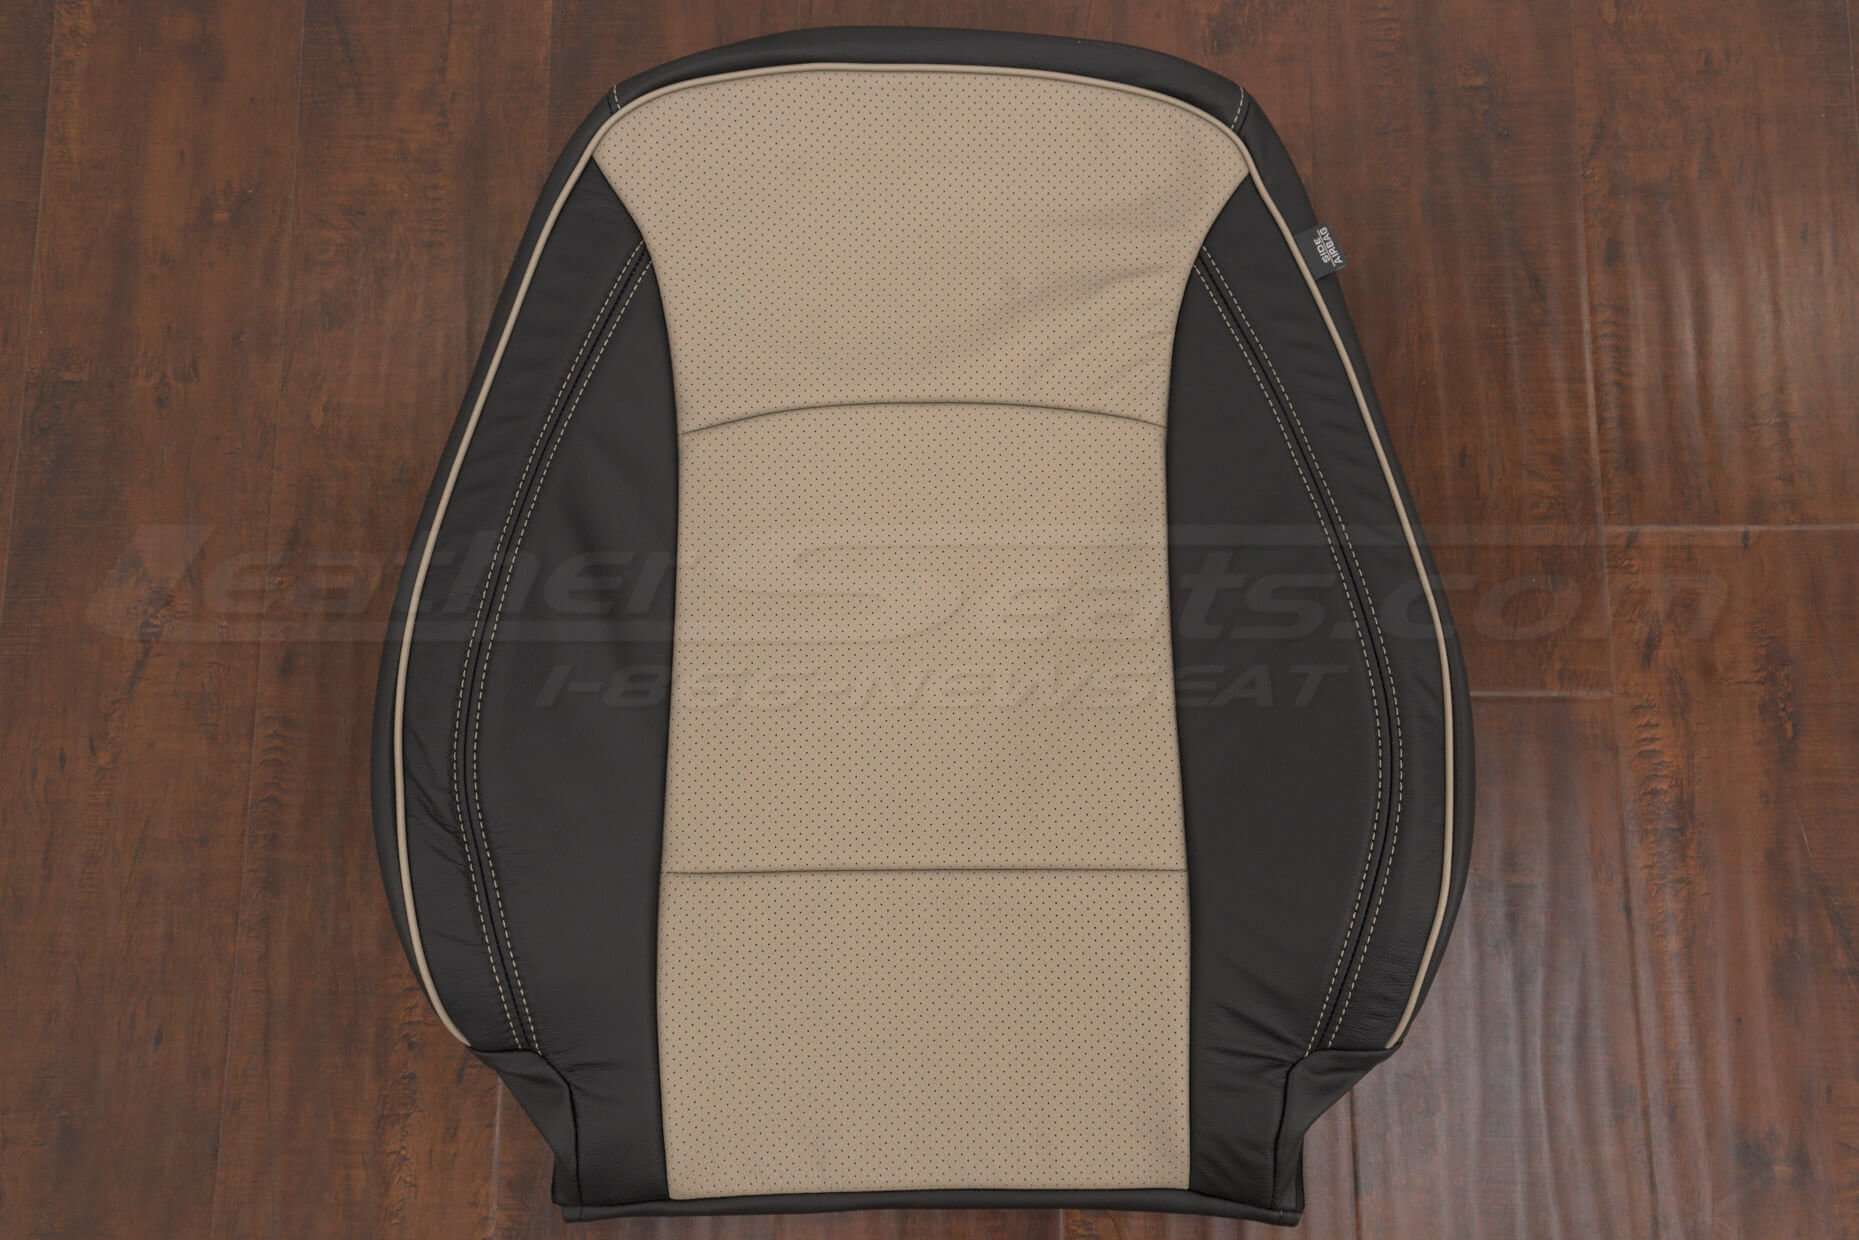 Kia Optima Front Backrest Upholstery with Perforated Body